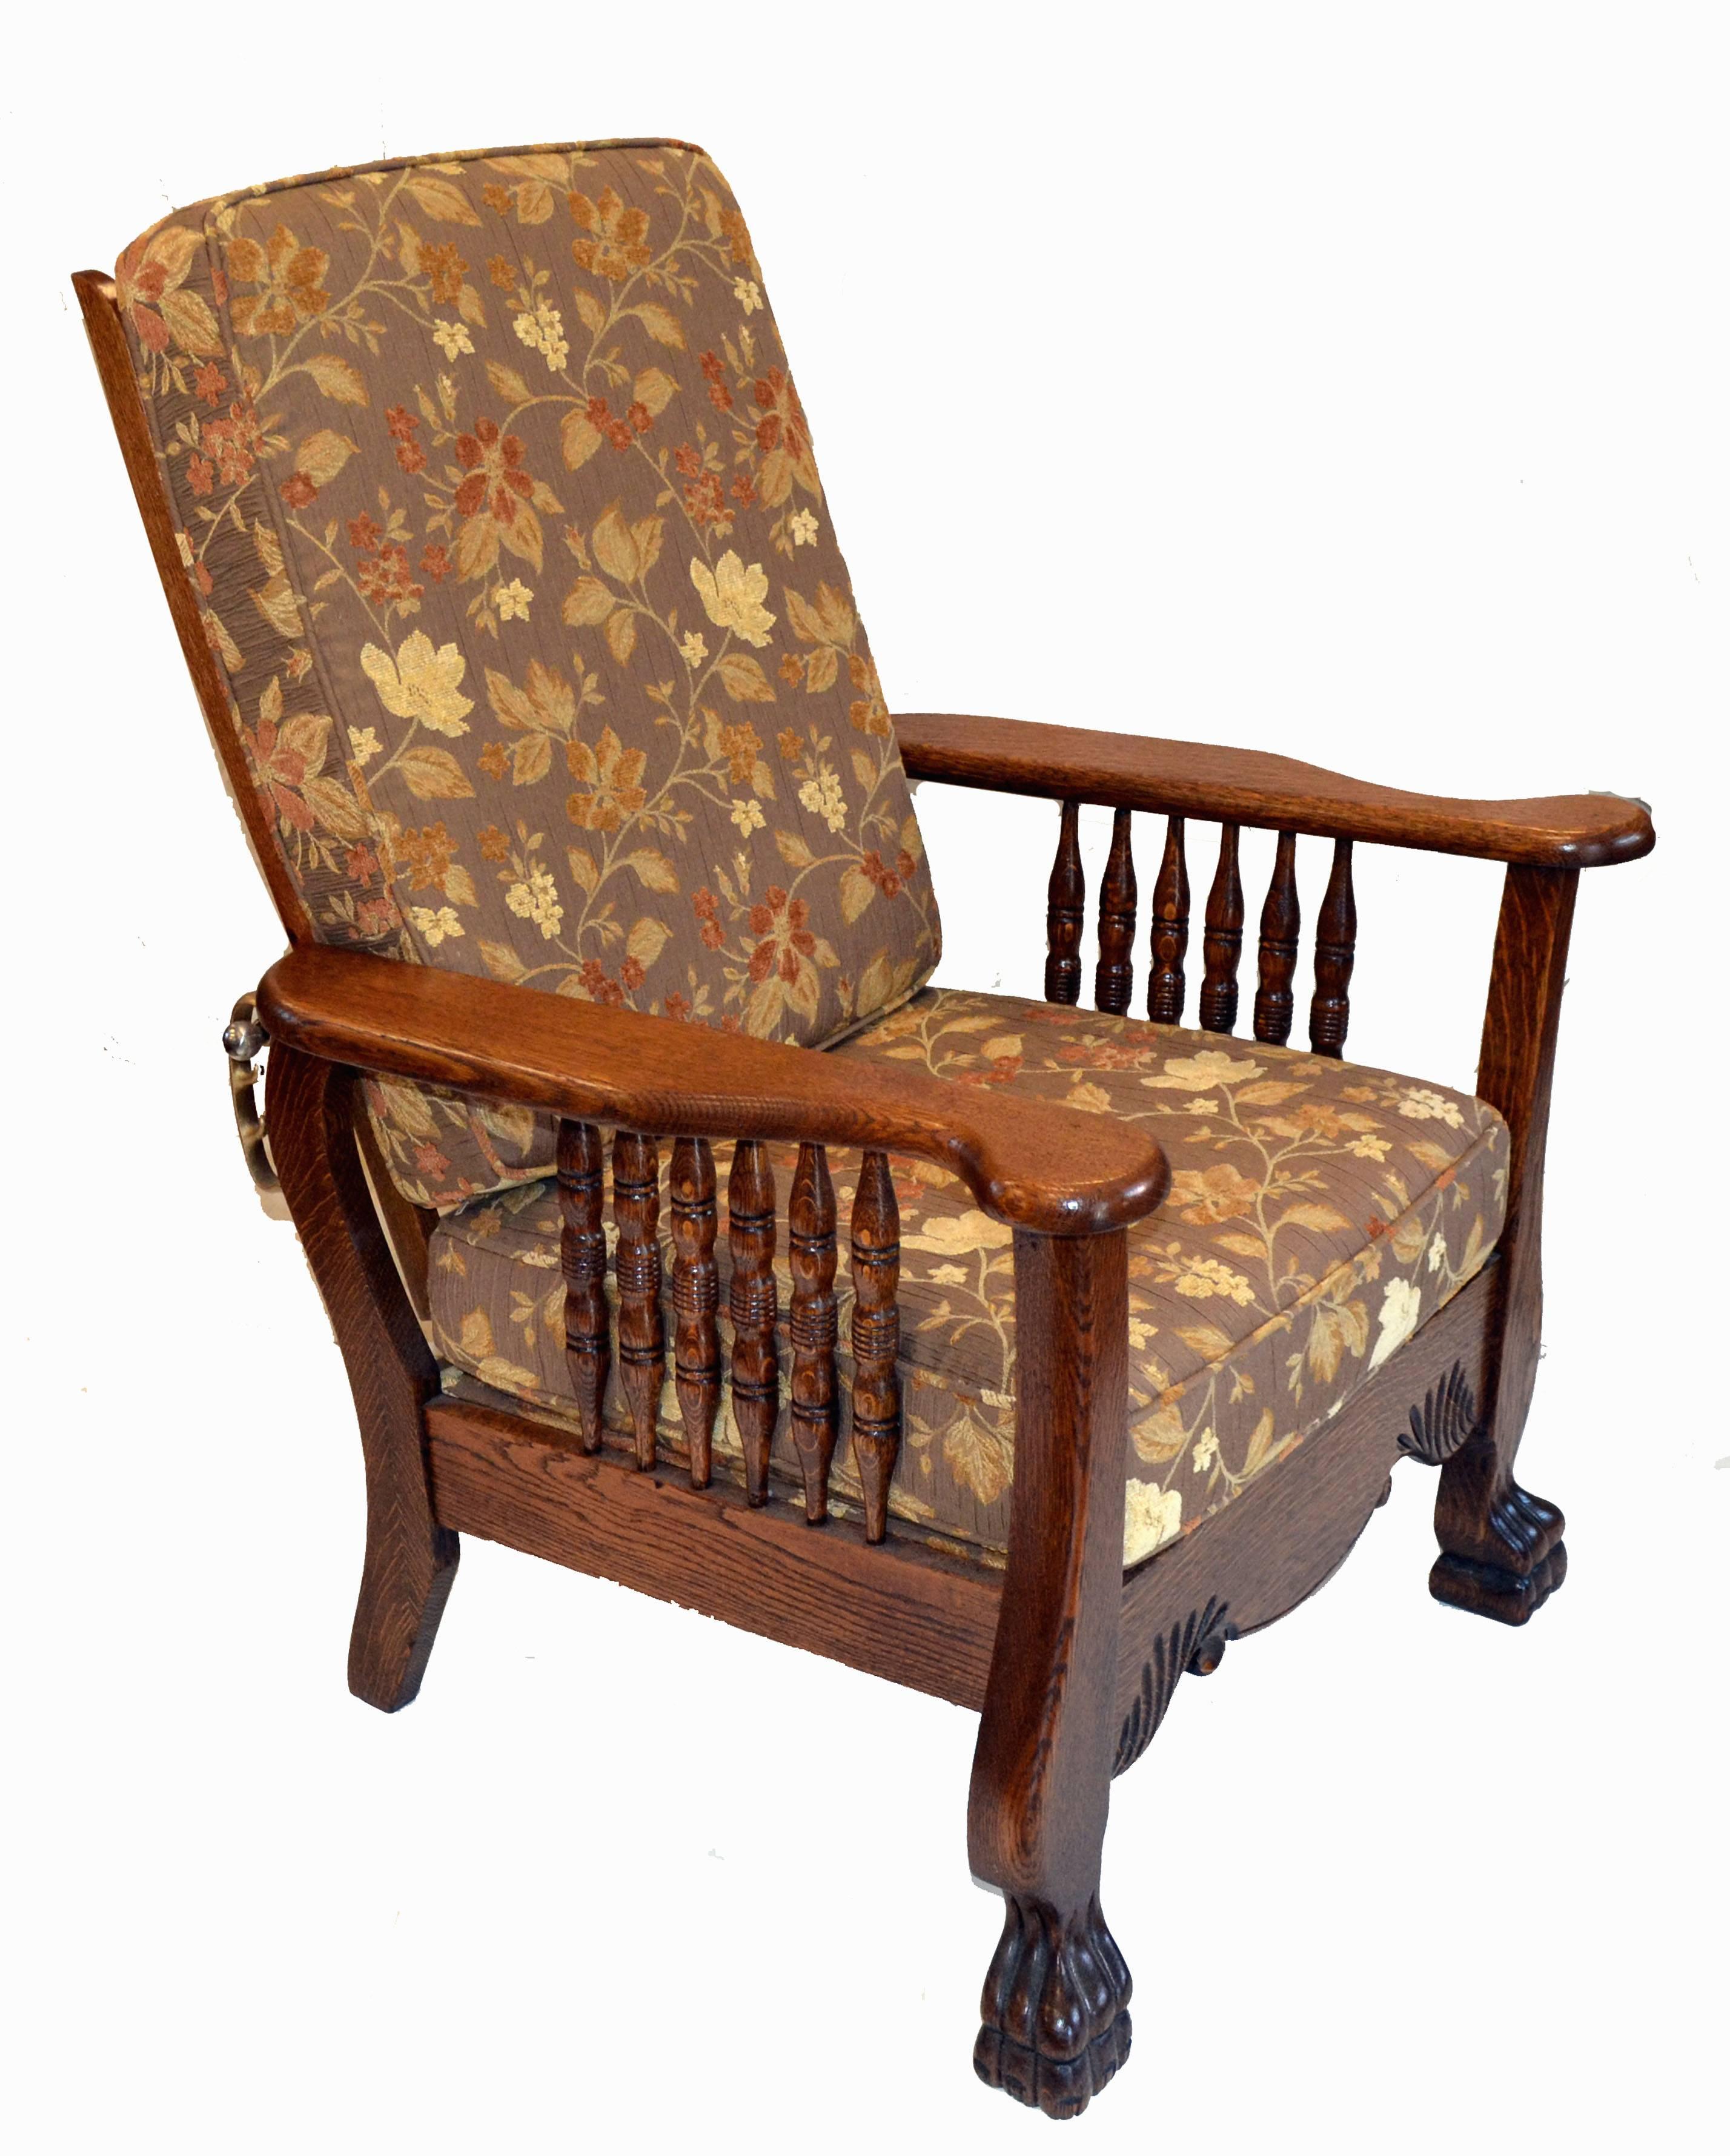 Fine solid oak, 1900-1915 Morris chair push button recliner. Auto adjustment with just the push of a button. Perfectly restored and recover with the highest quality fabrics. Size: 37